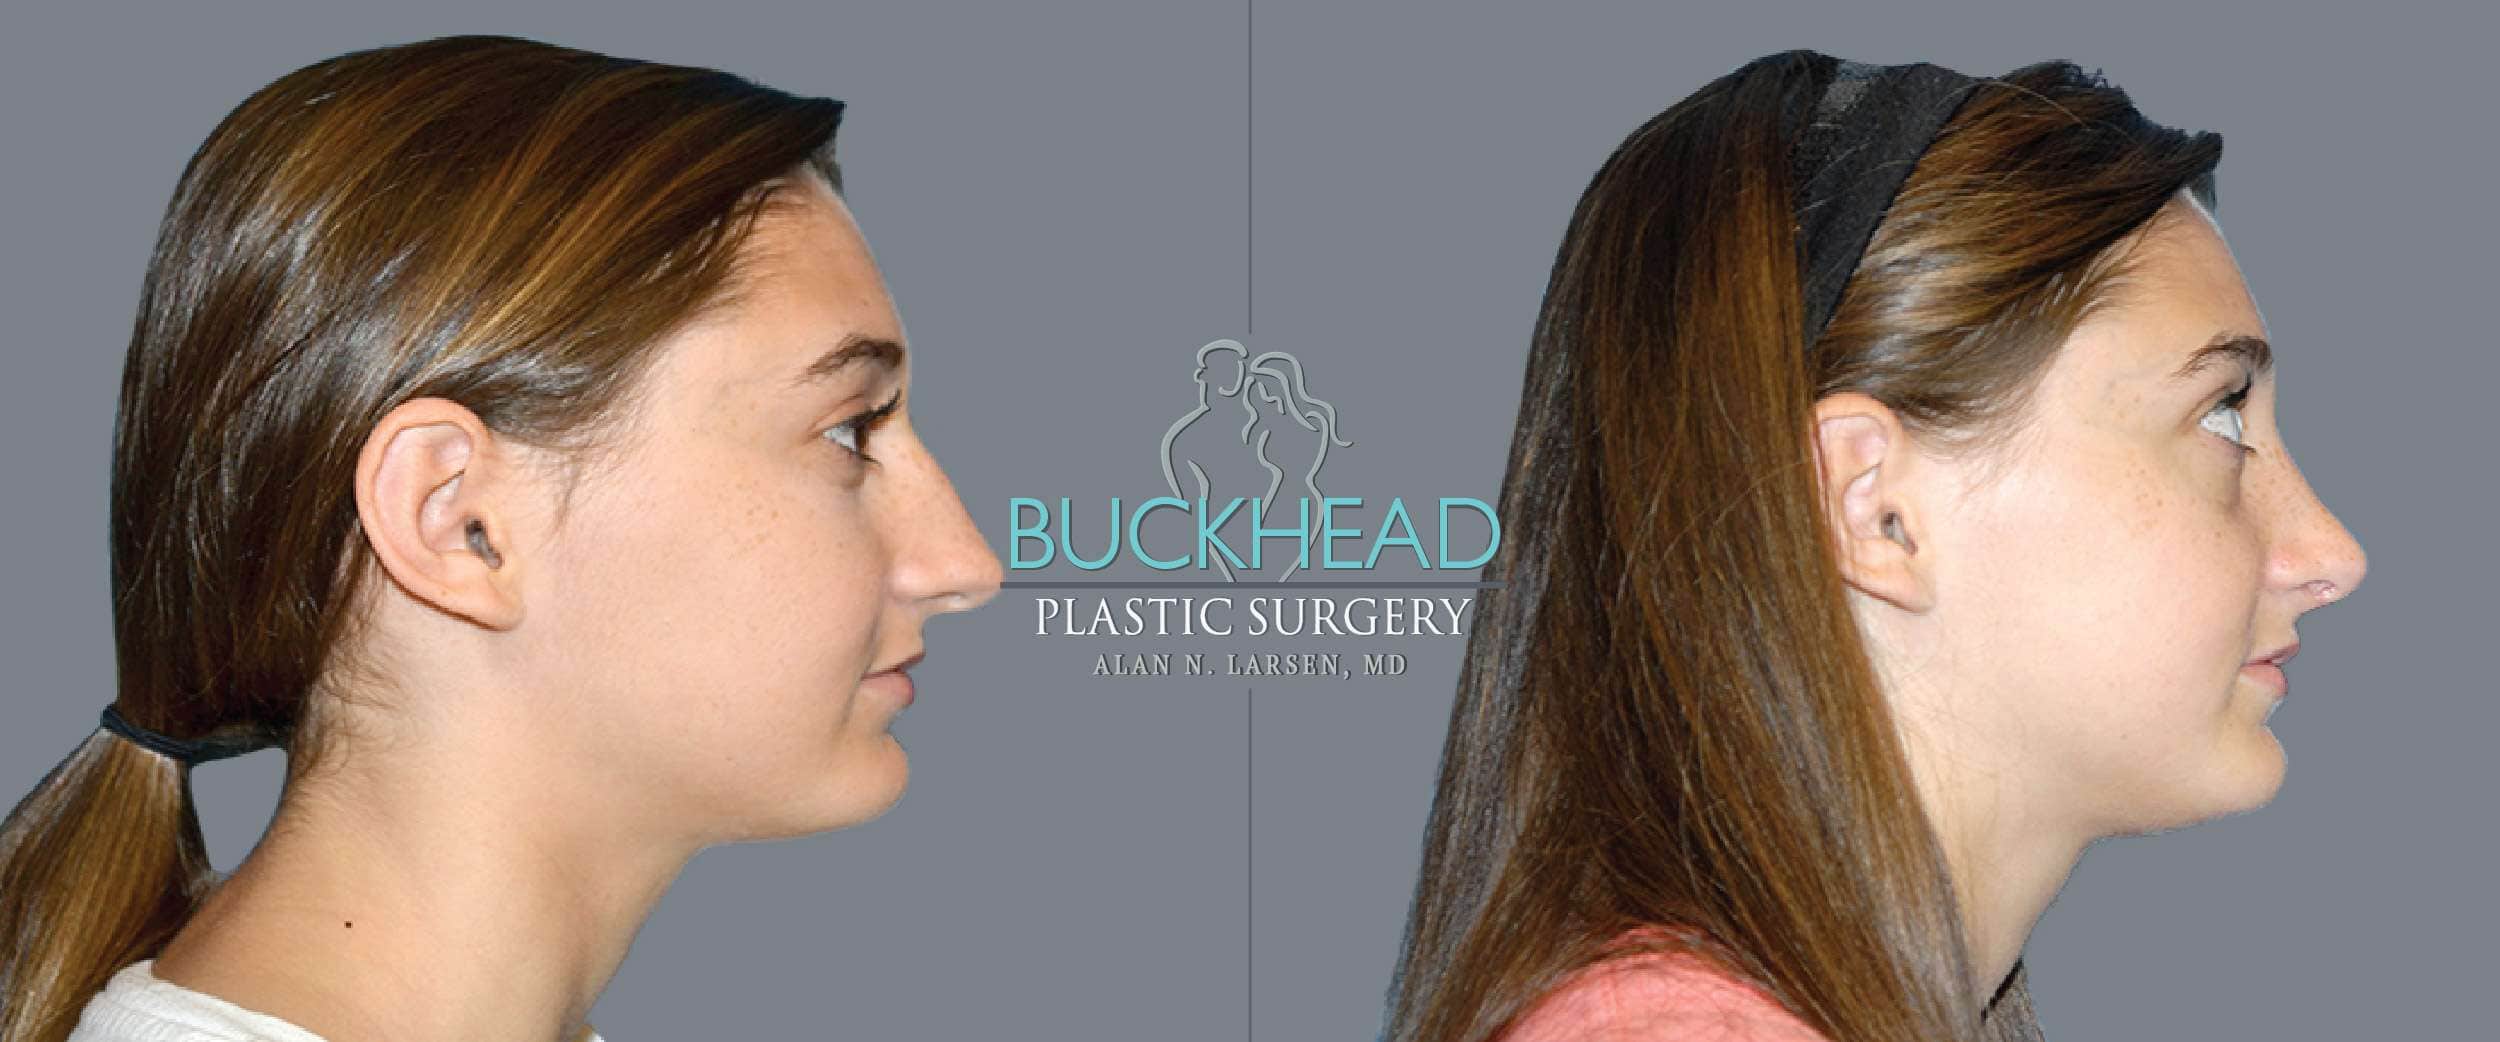 Before and After Photo gallery | Rhinoplasty | Buckhead Plastic Surgery | Double Board-Certified Plastic Surgeon in Atlanta GA